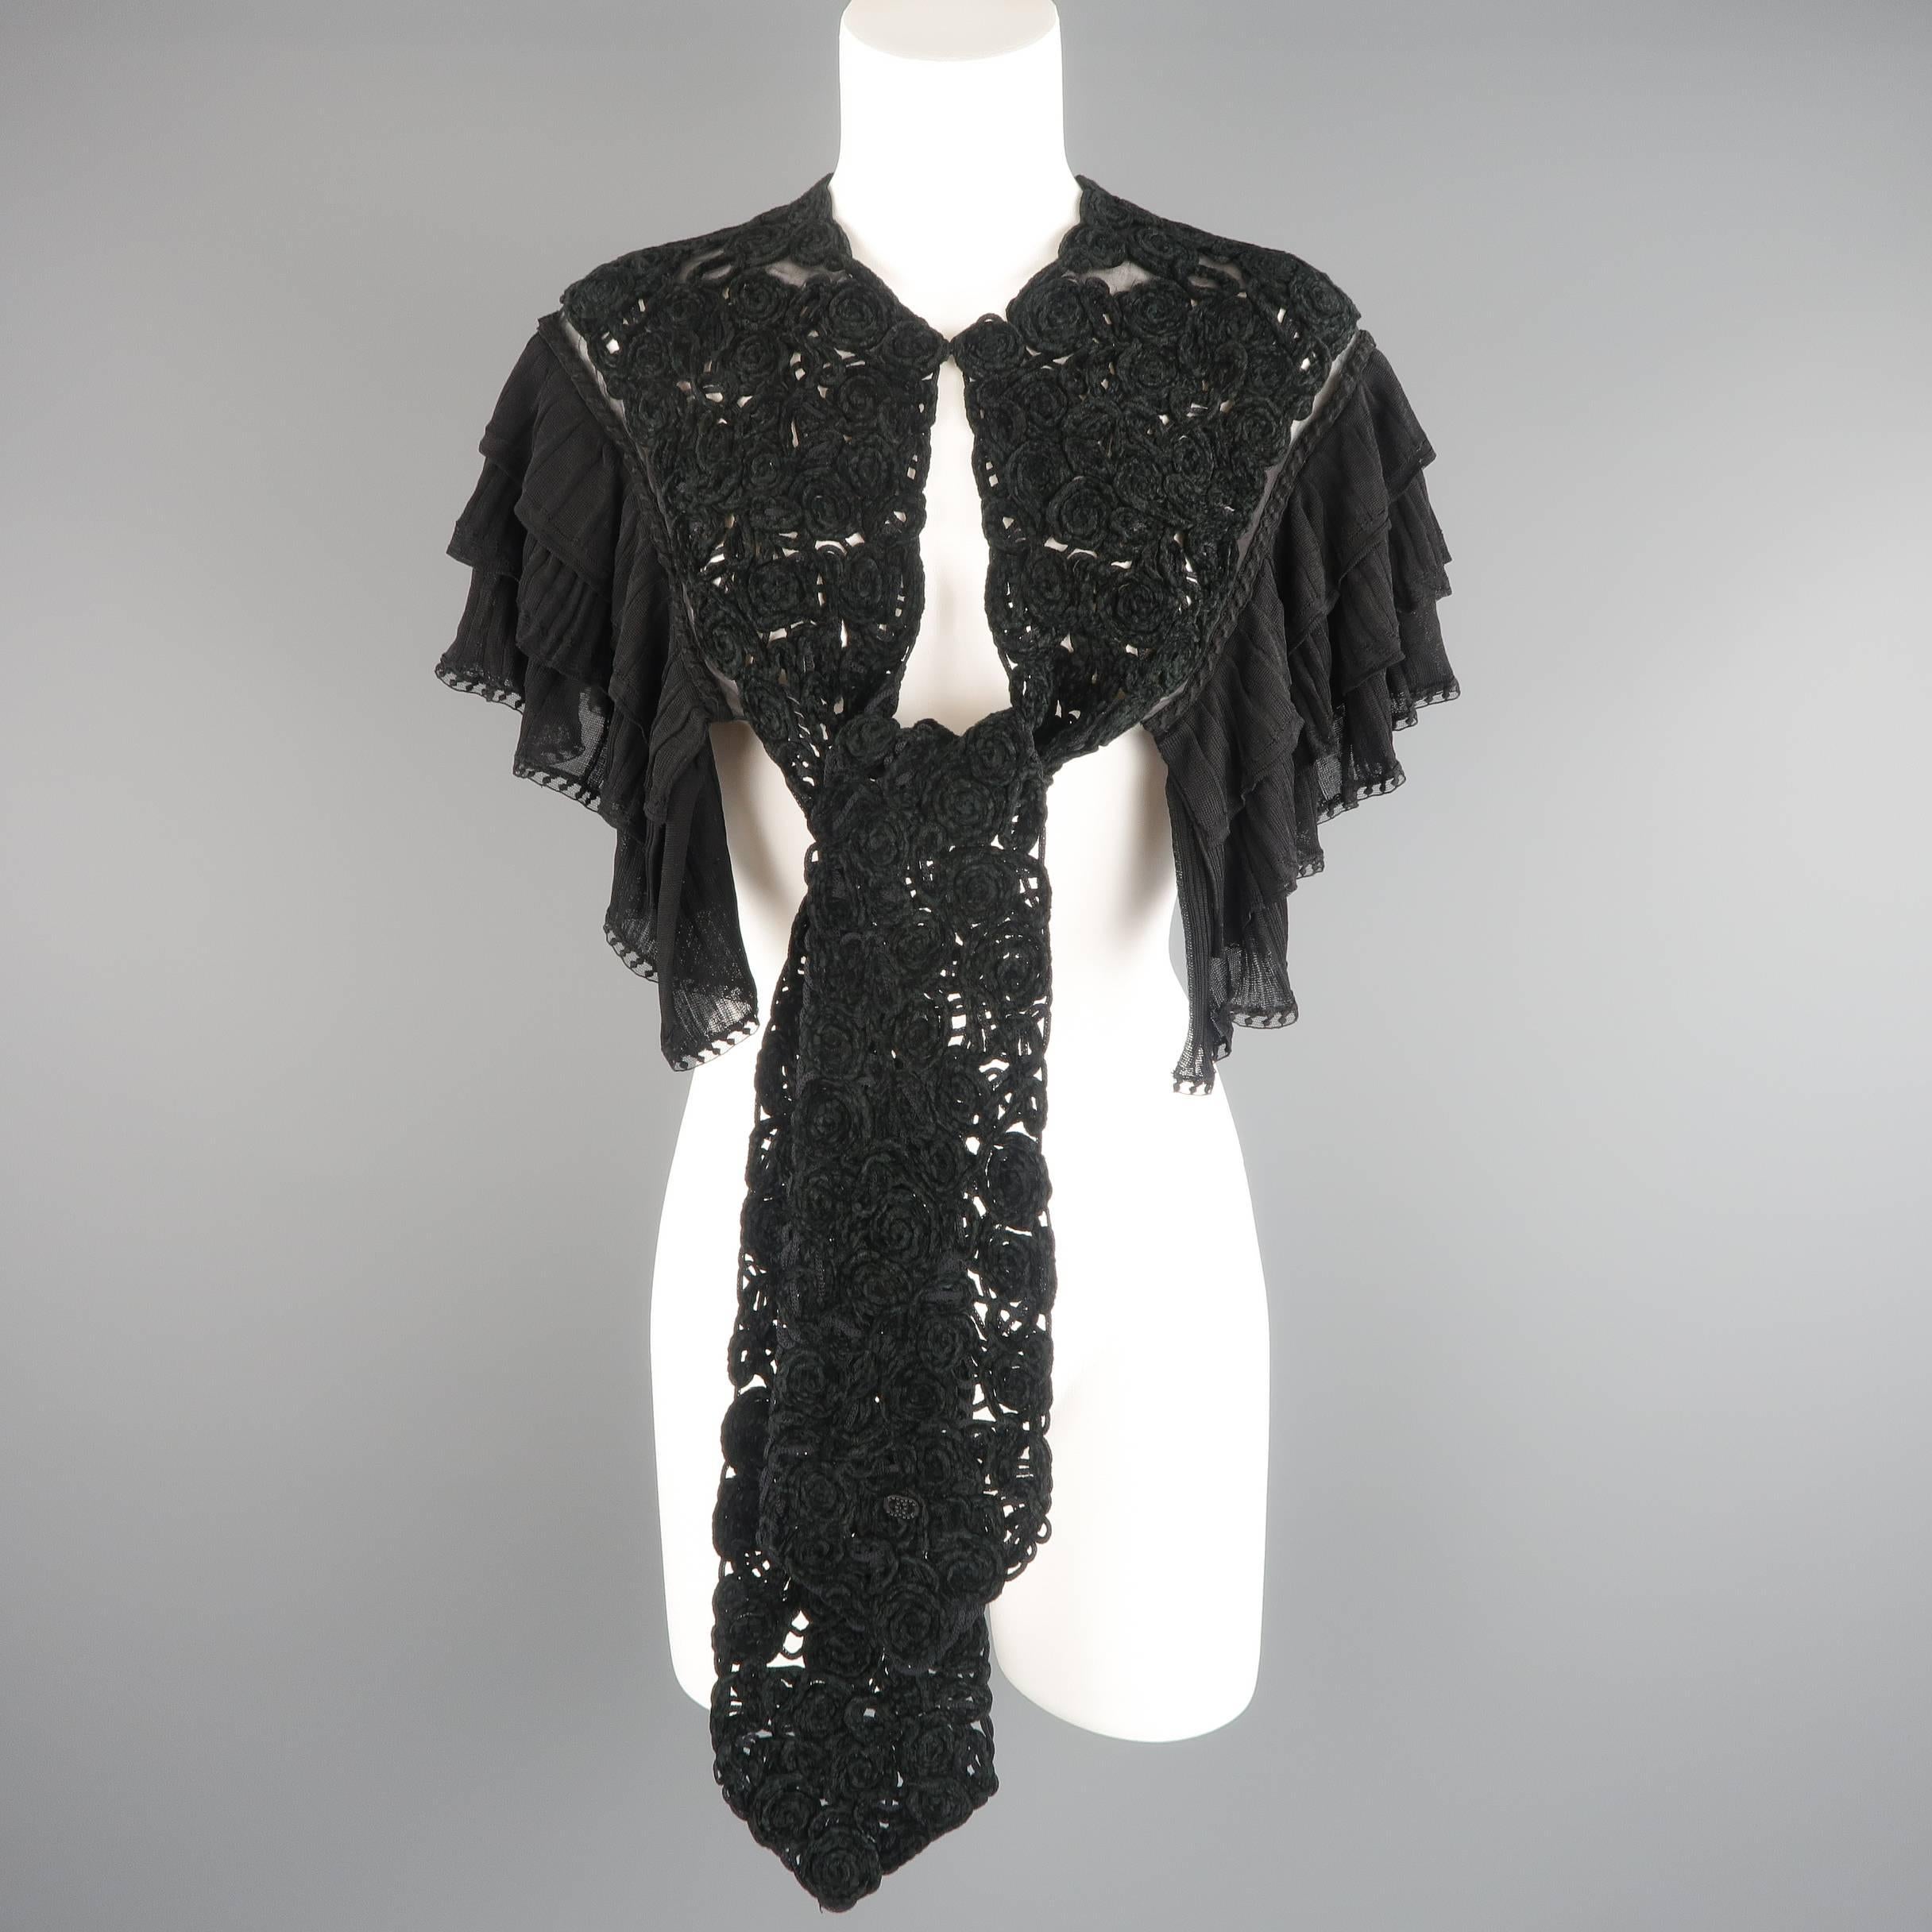 This rare CHANEL capelet comes in a velvet floral textured knit and features sheer lined shoulders. ruffled knit trim, and a long ascot collar with hook eye closure and CC emblem. Tags removed. As-is. Made in France. Good Pre-Owned Condition.
